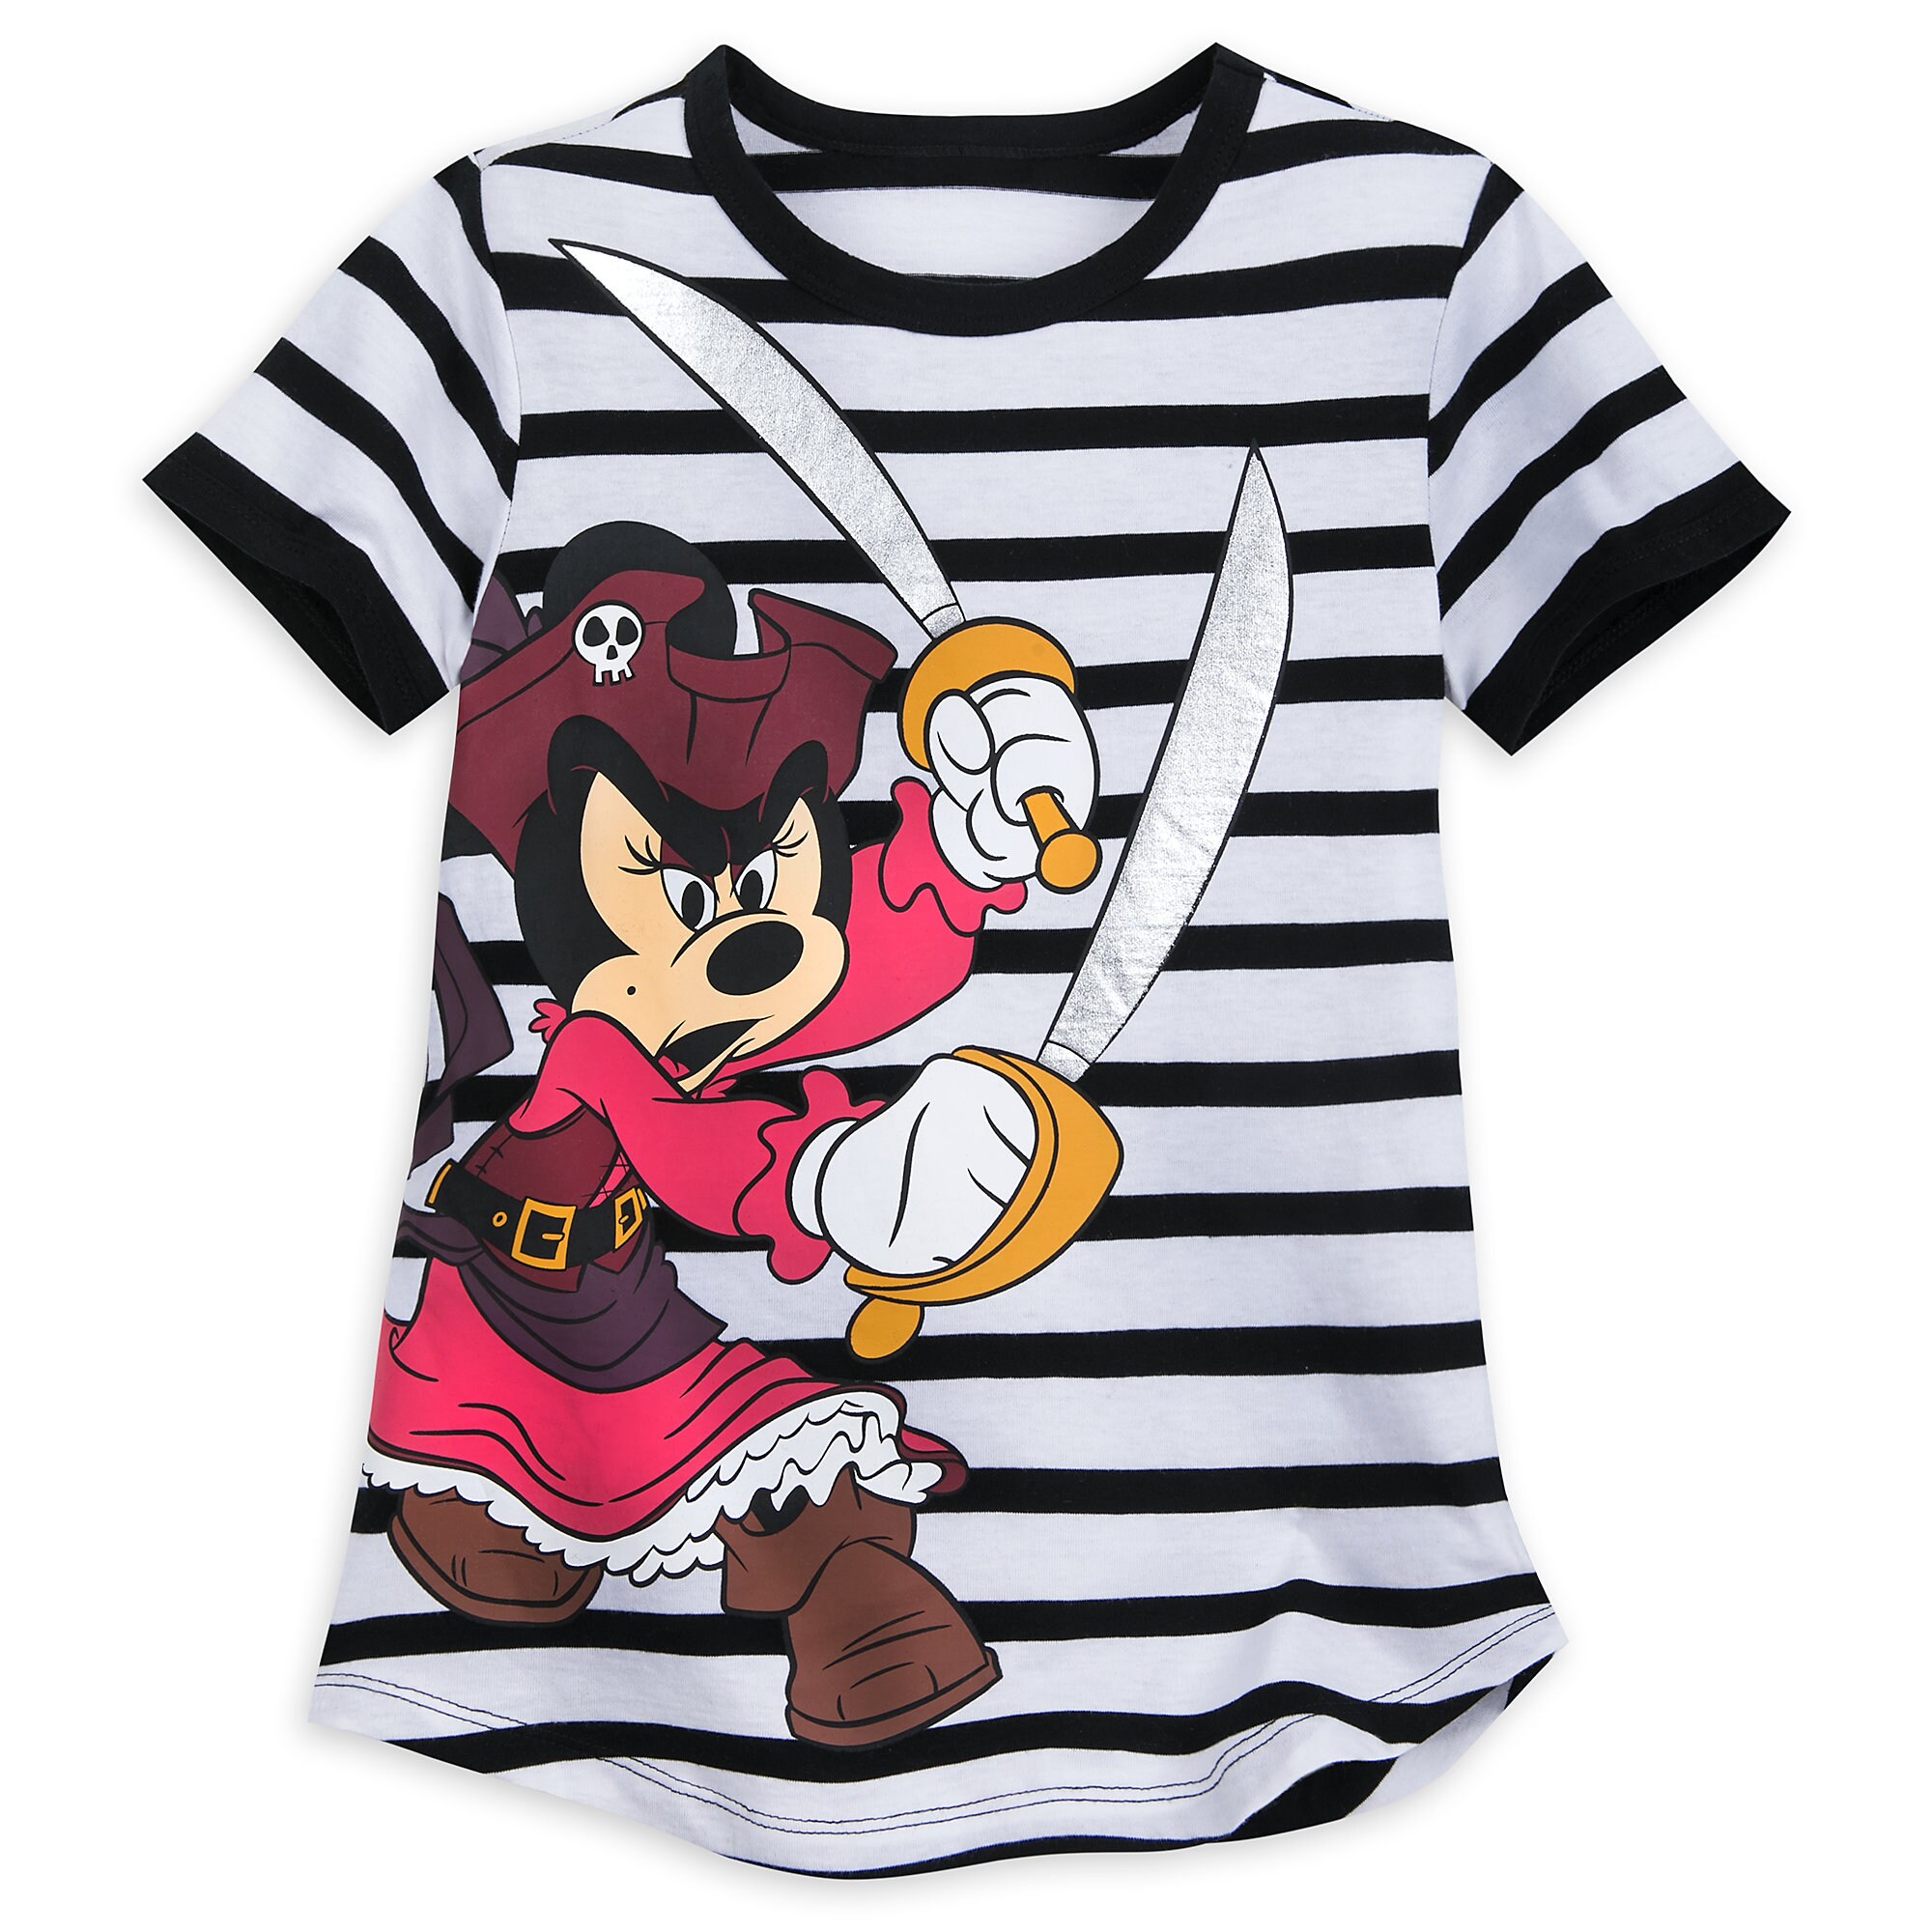 Minnie Mouse Pirates of the Caribbean T-Shirt for Girls